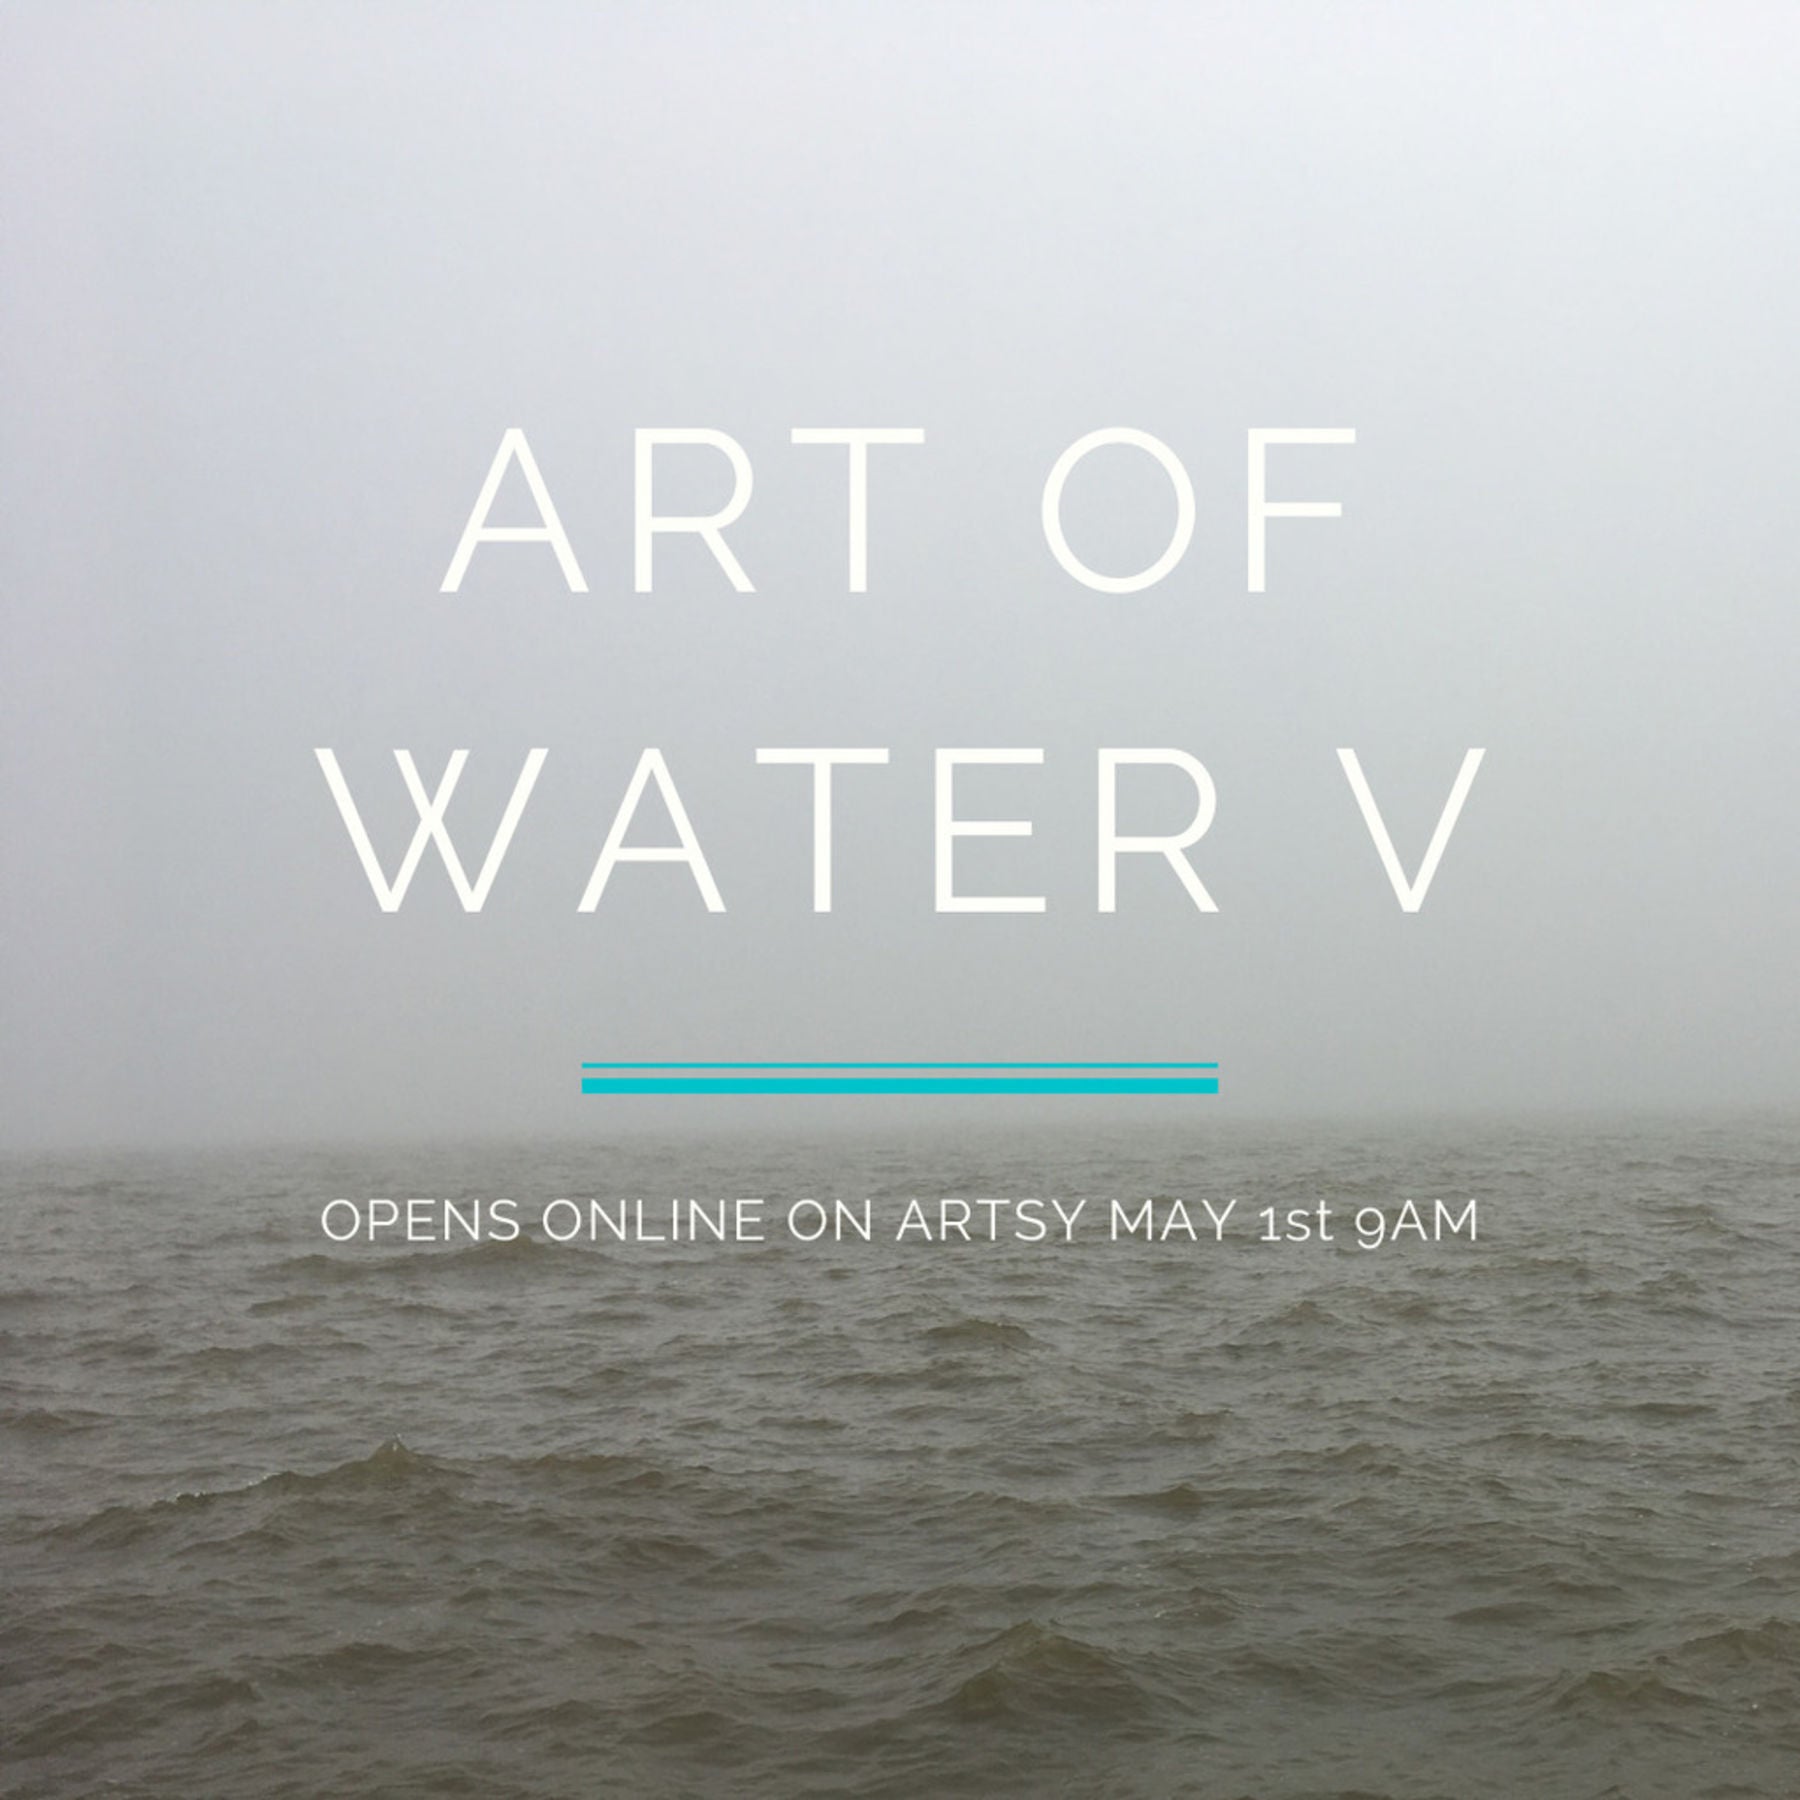 Art of Water V Exhibition